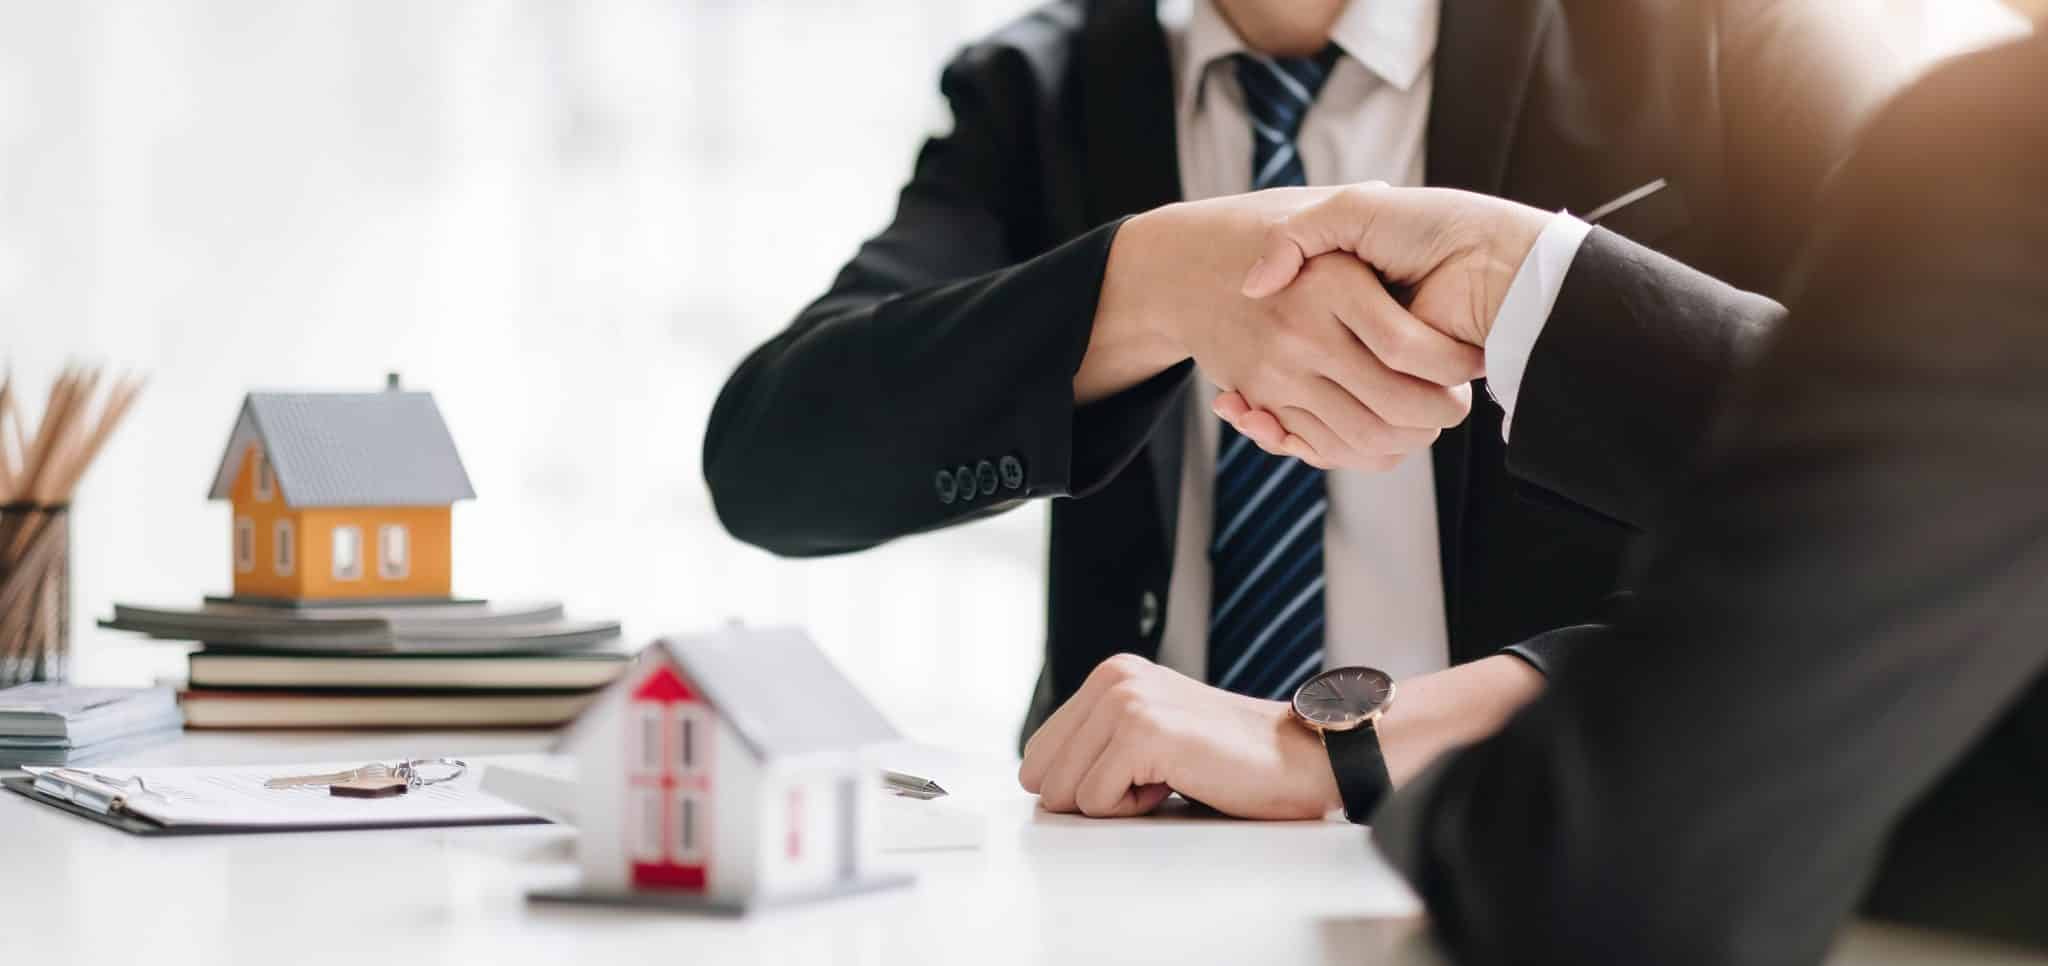 Title company agent shaking hands with real estate buyer